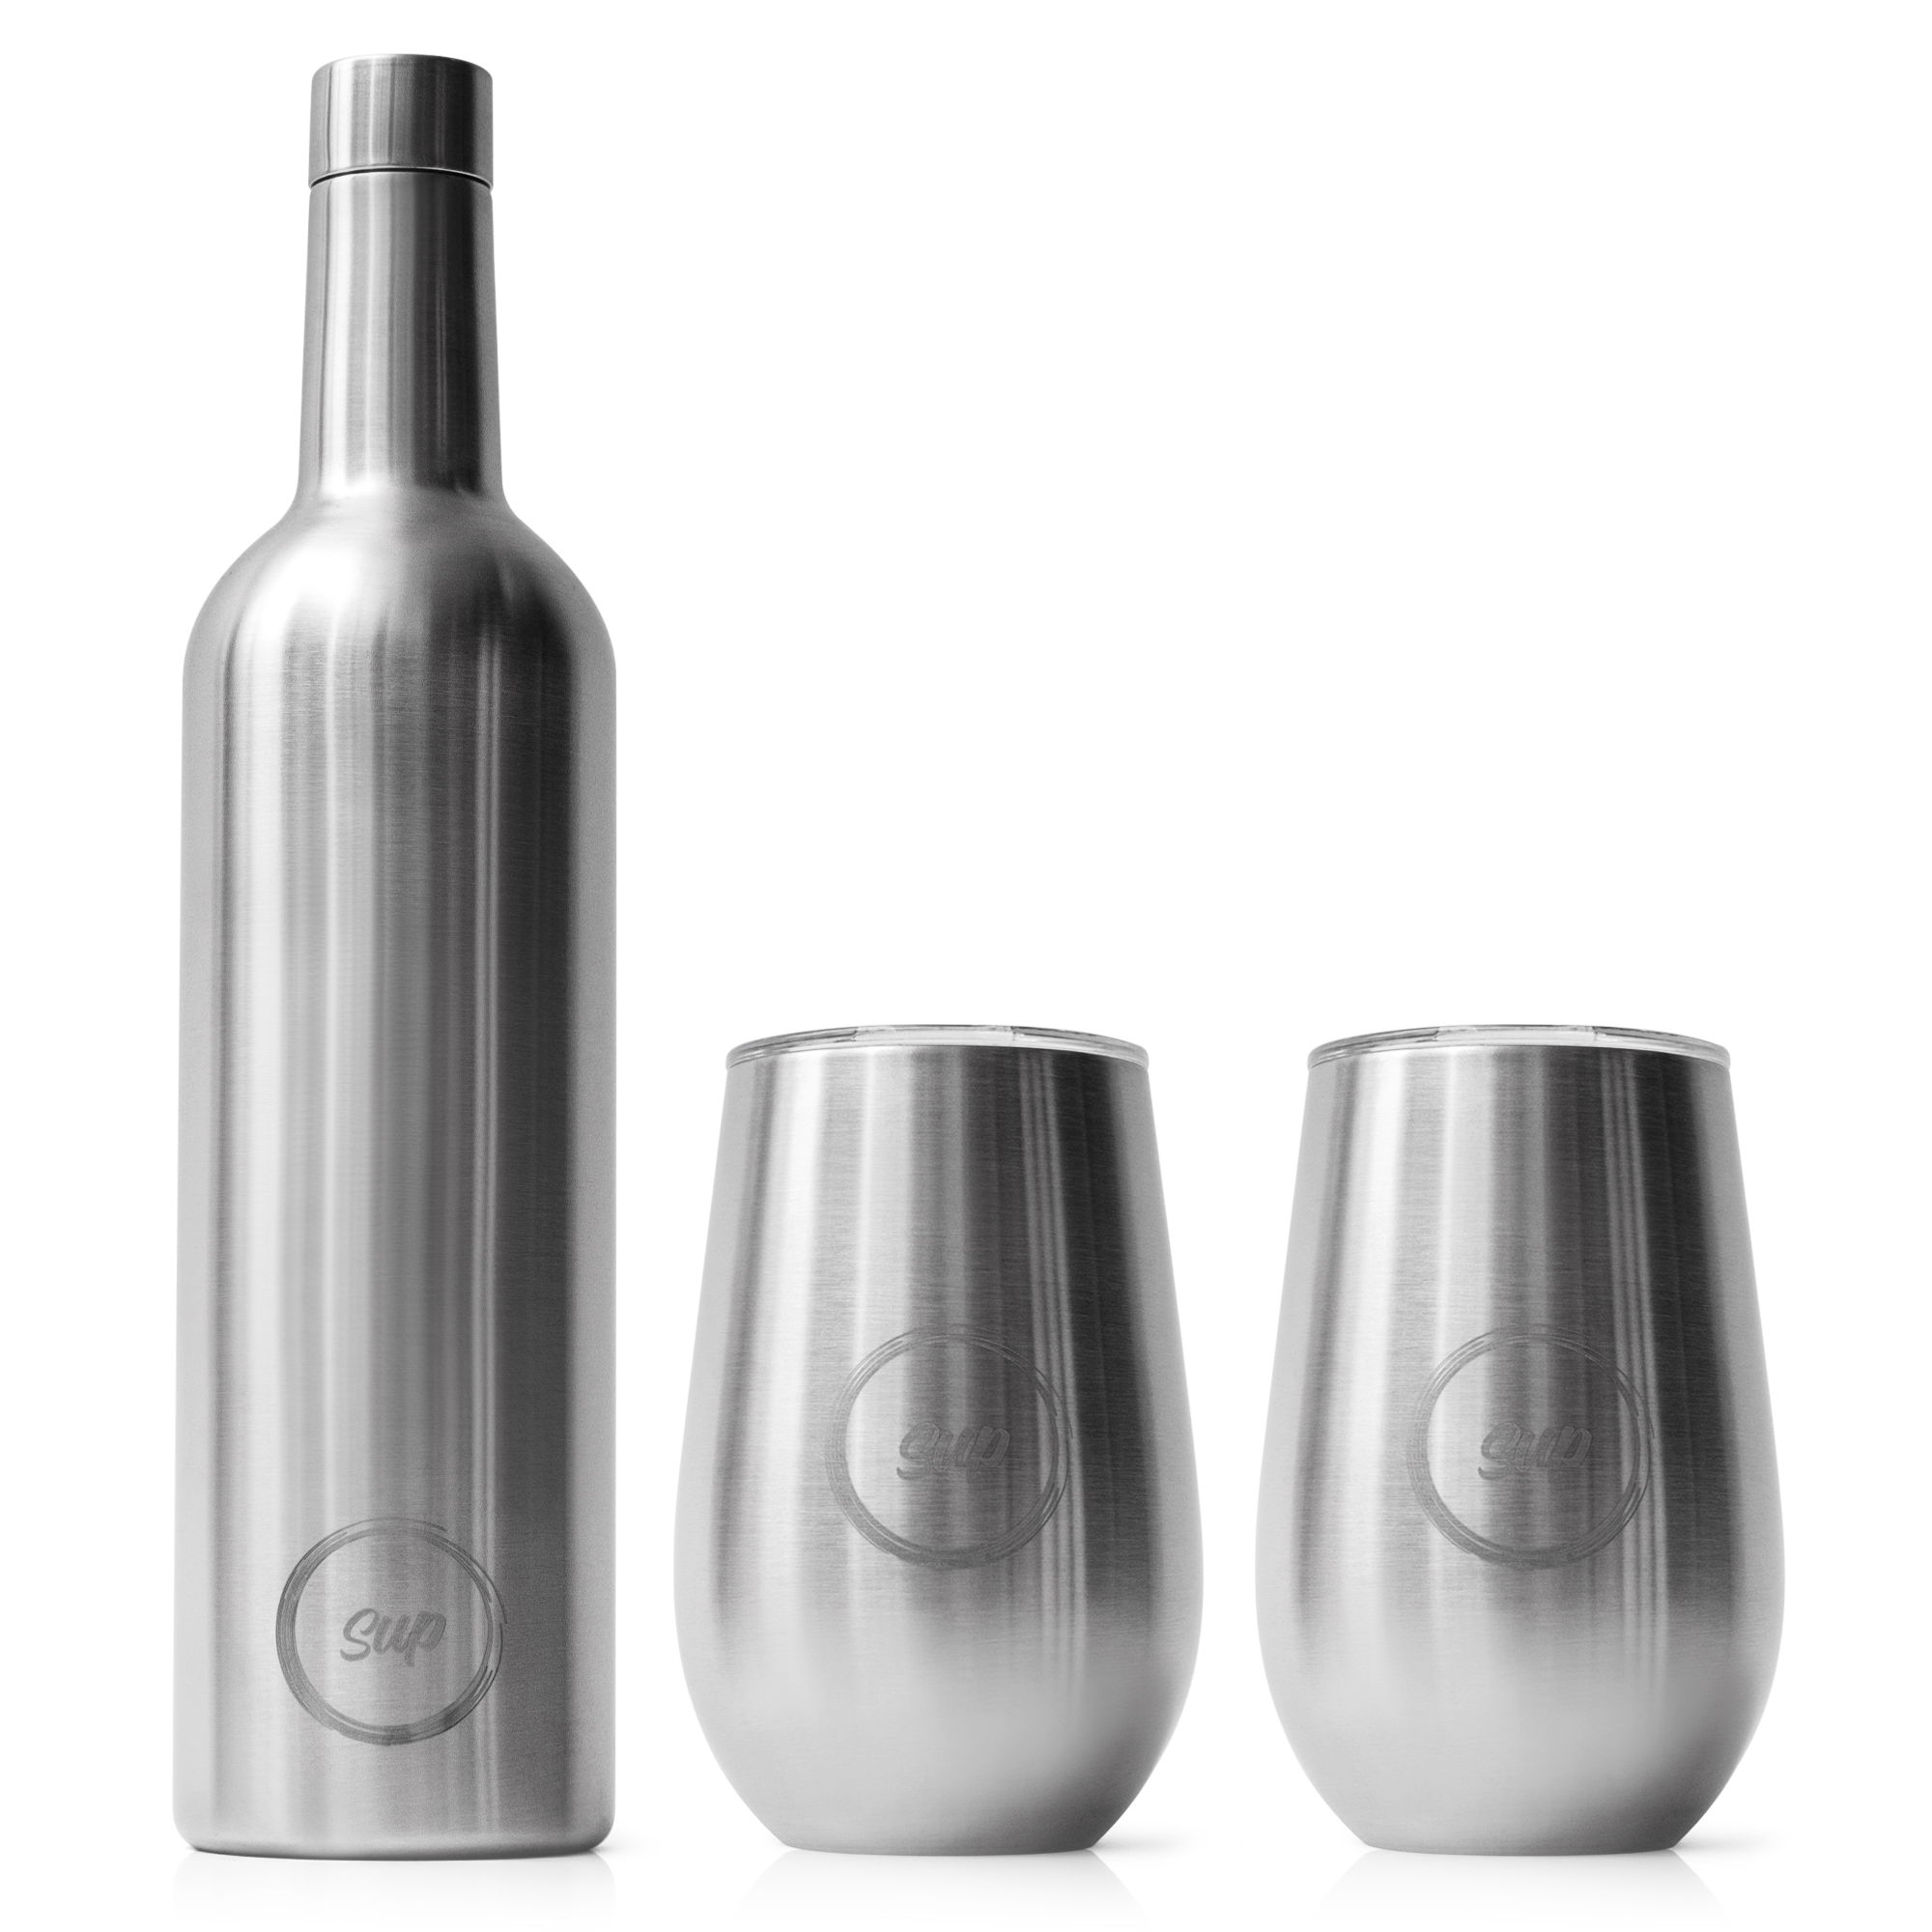 Sup Insulated Wine Bottles & Tumblers Stainless Steel Flasks & Coolers –  Sup Drinkware